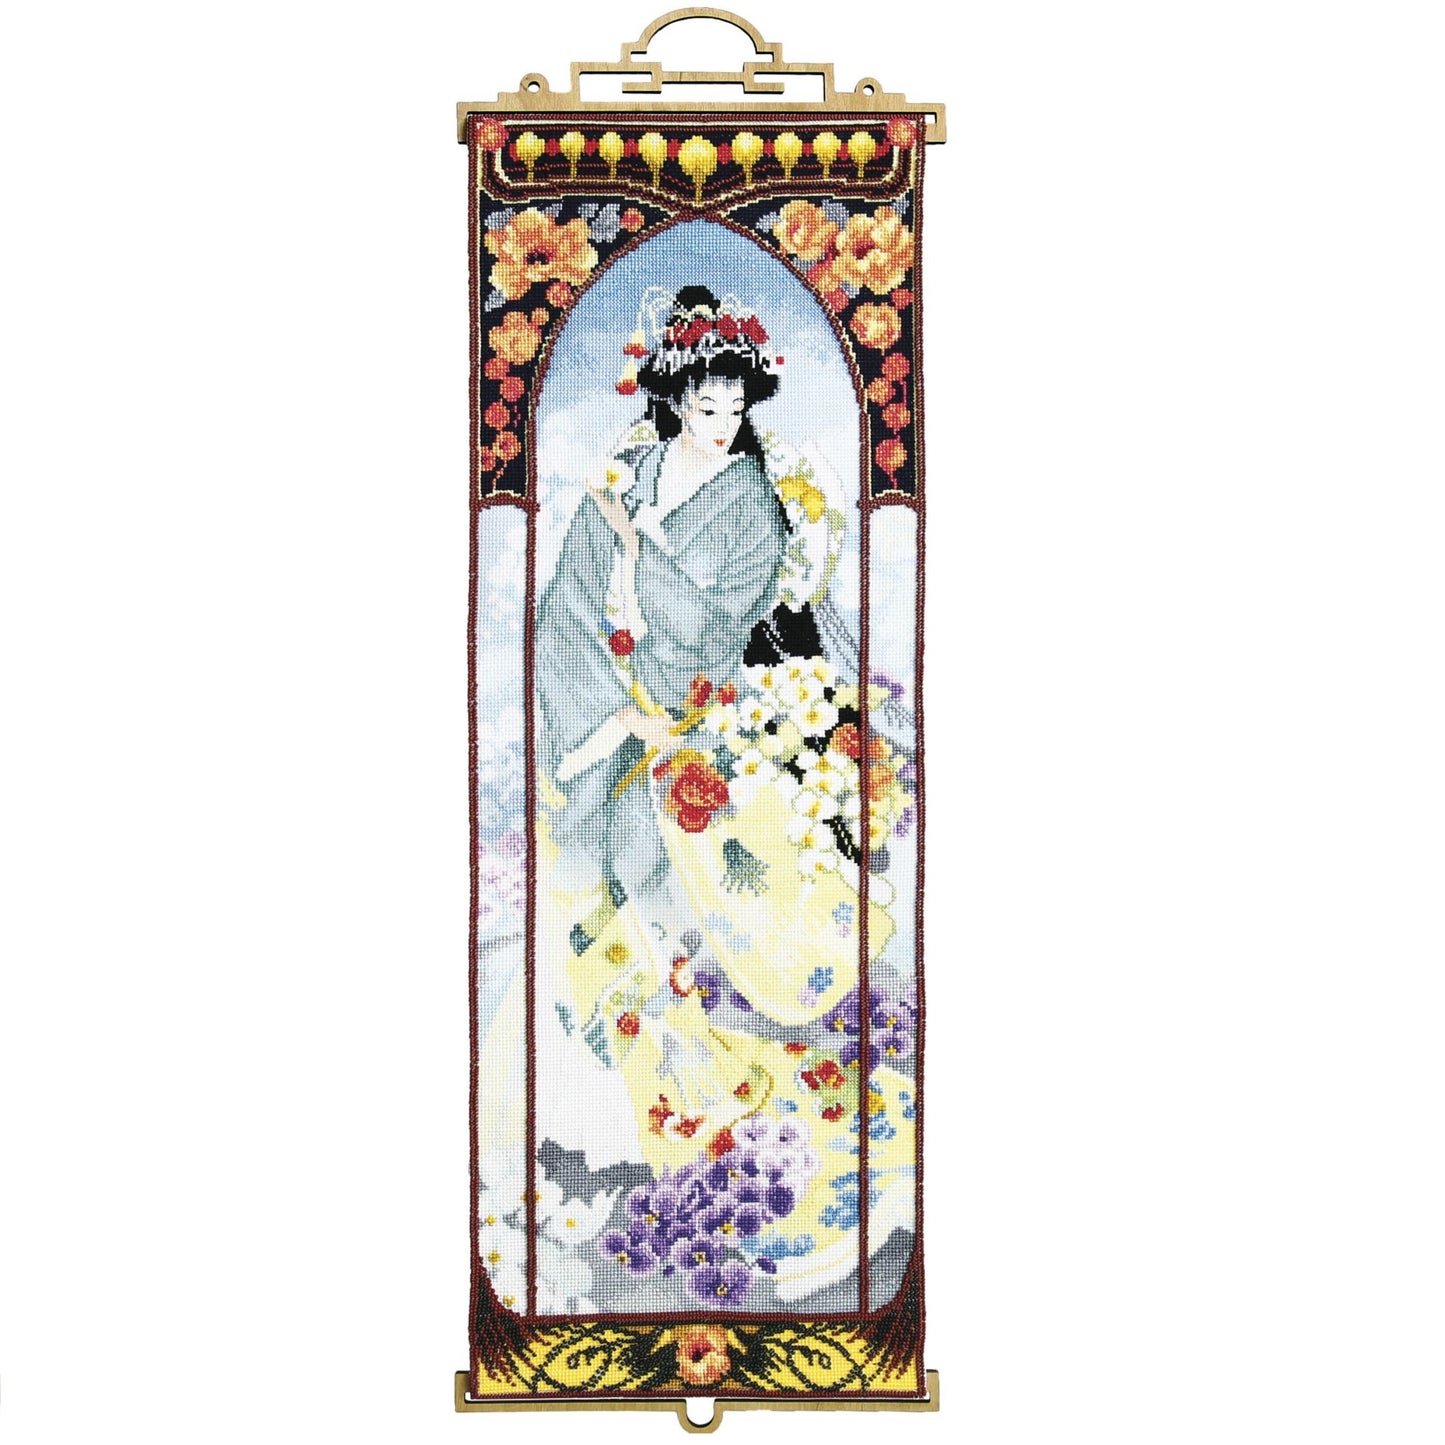 GEISHA WITH ORCHIDS, Counted Cross Stitch Kit, 14 count Aida, MOMENTOS MAGICOS (M-325)